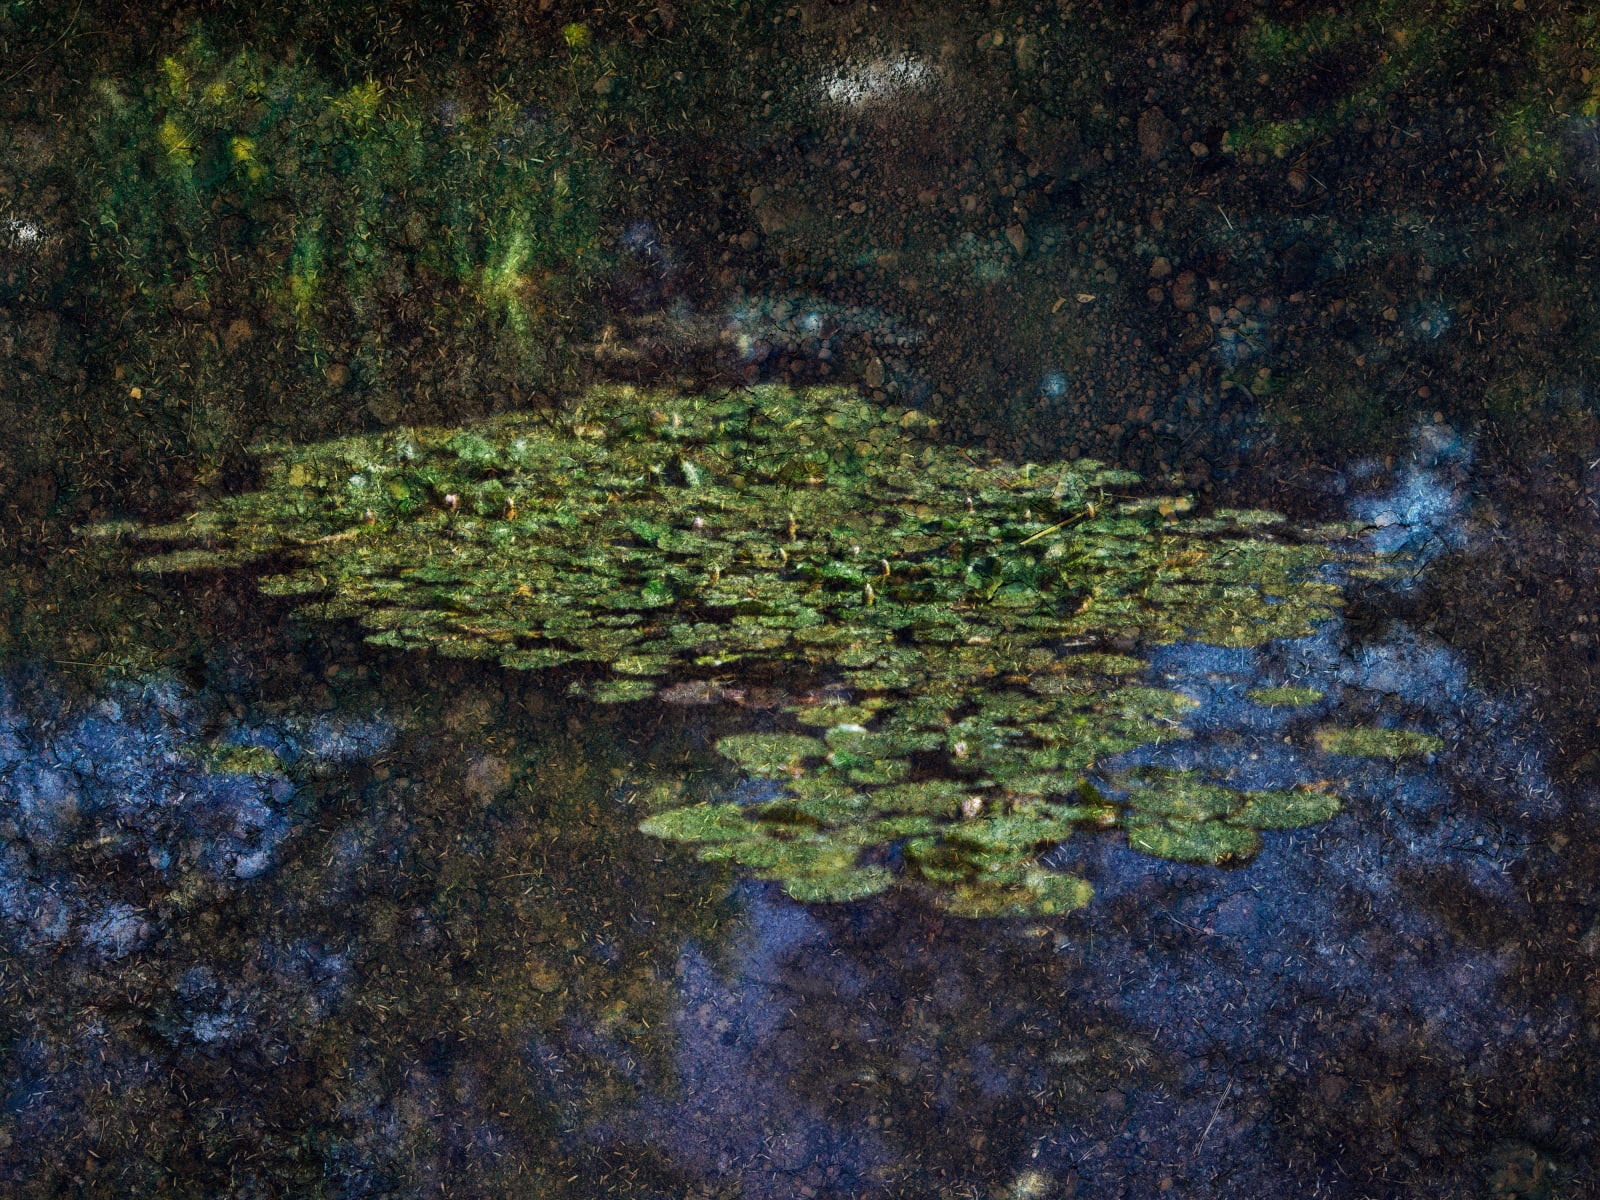 Abelardo Morell, Tent-Camera Image on Ground: Water Lilies in Monet's Water Garden #1, Giverny, France, 2023